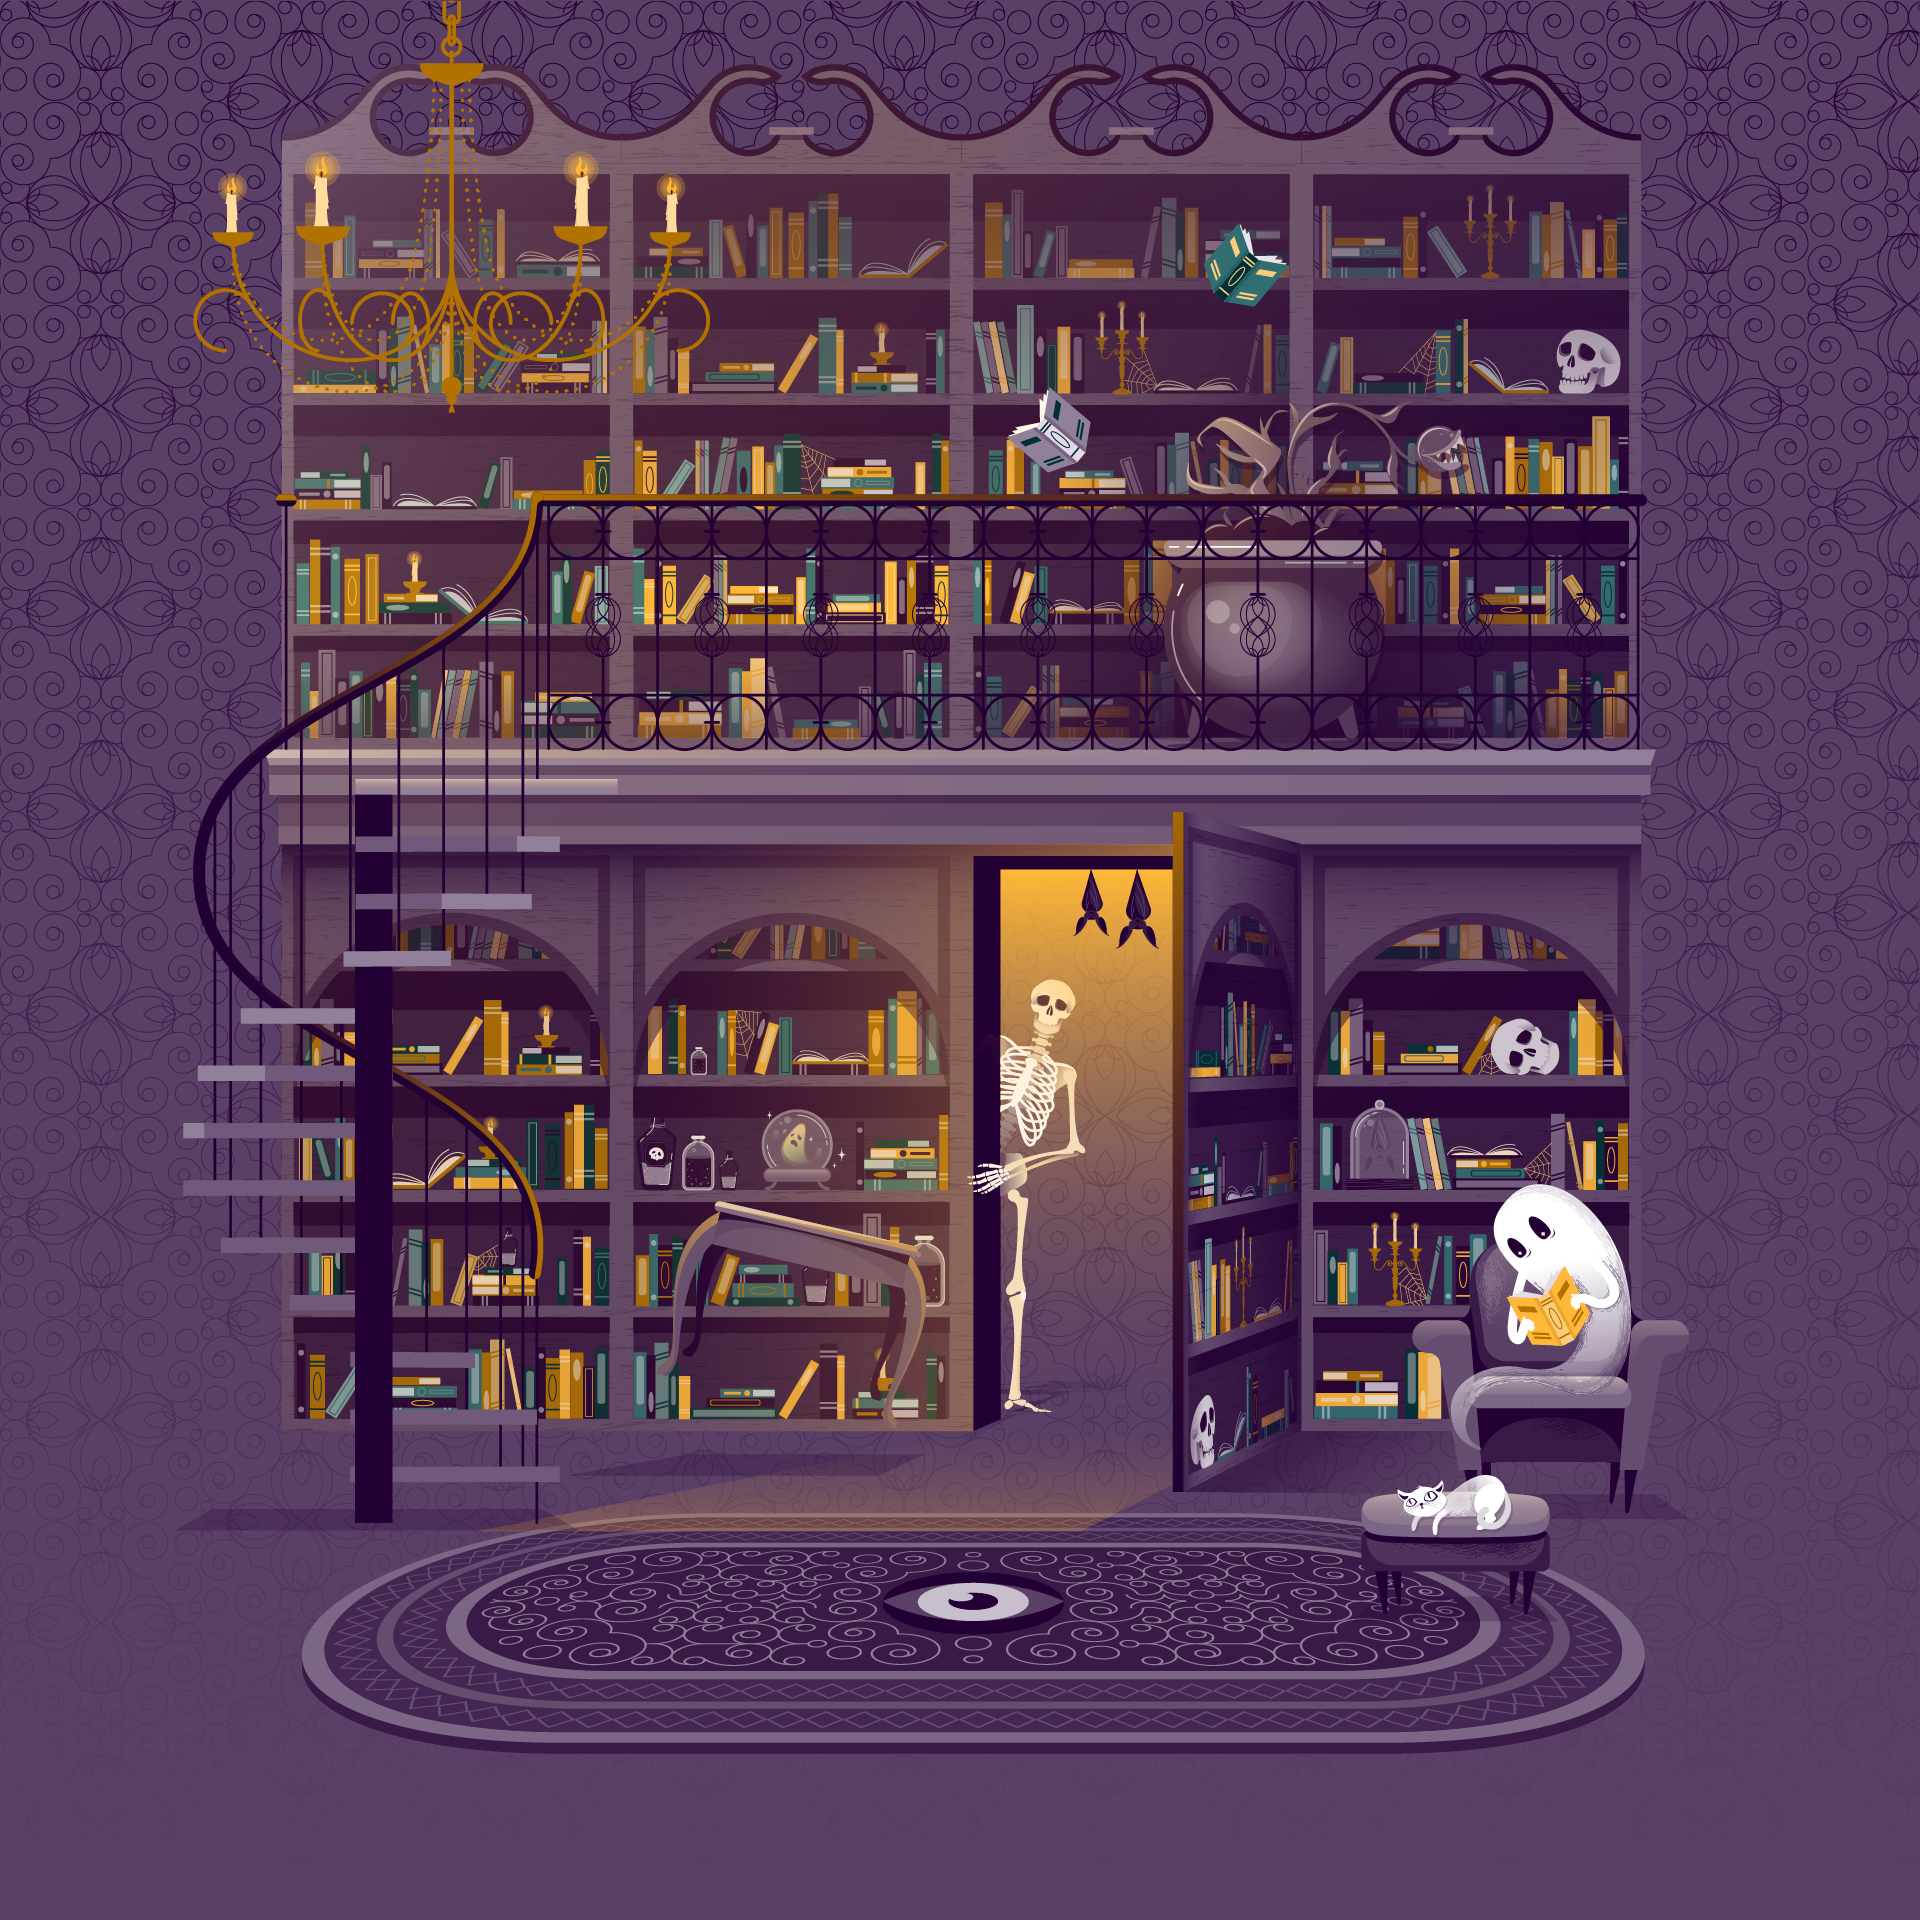 Illustration of a dark 2 level library interior with a chandelier, hovering books, a skeleton peeking out from a secret door, and a ghost reading.